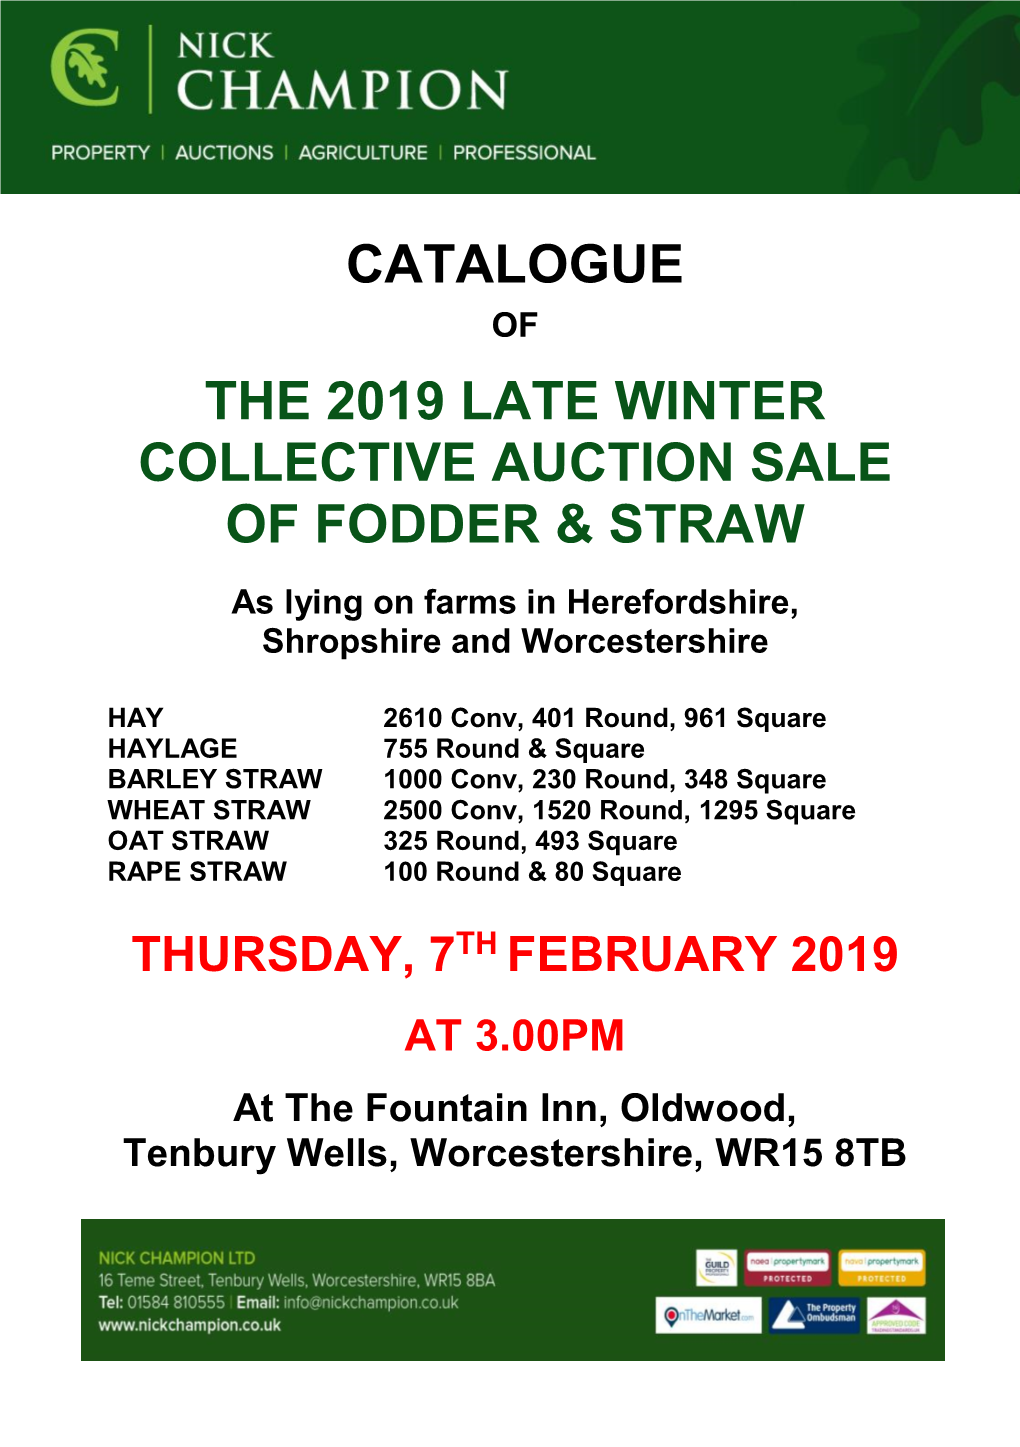 Catalogue the 2019 Late Winter Collective Auction